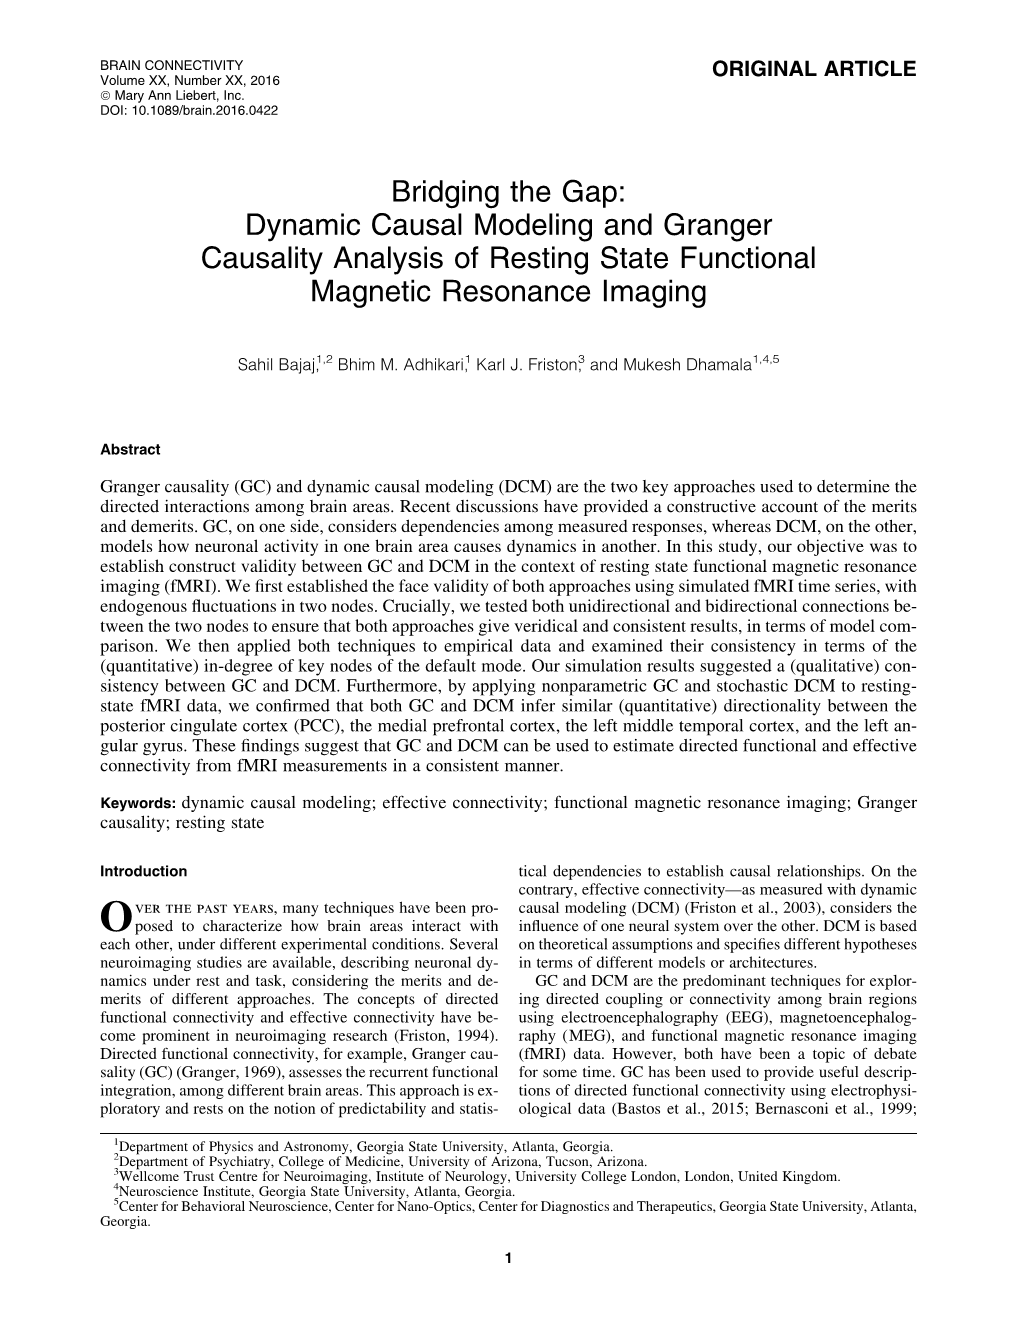 Dynamic Causal Modeling and Granger Causality Analysis of Resting State Functional Magnetic Resonance Imaging